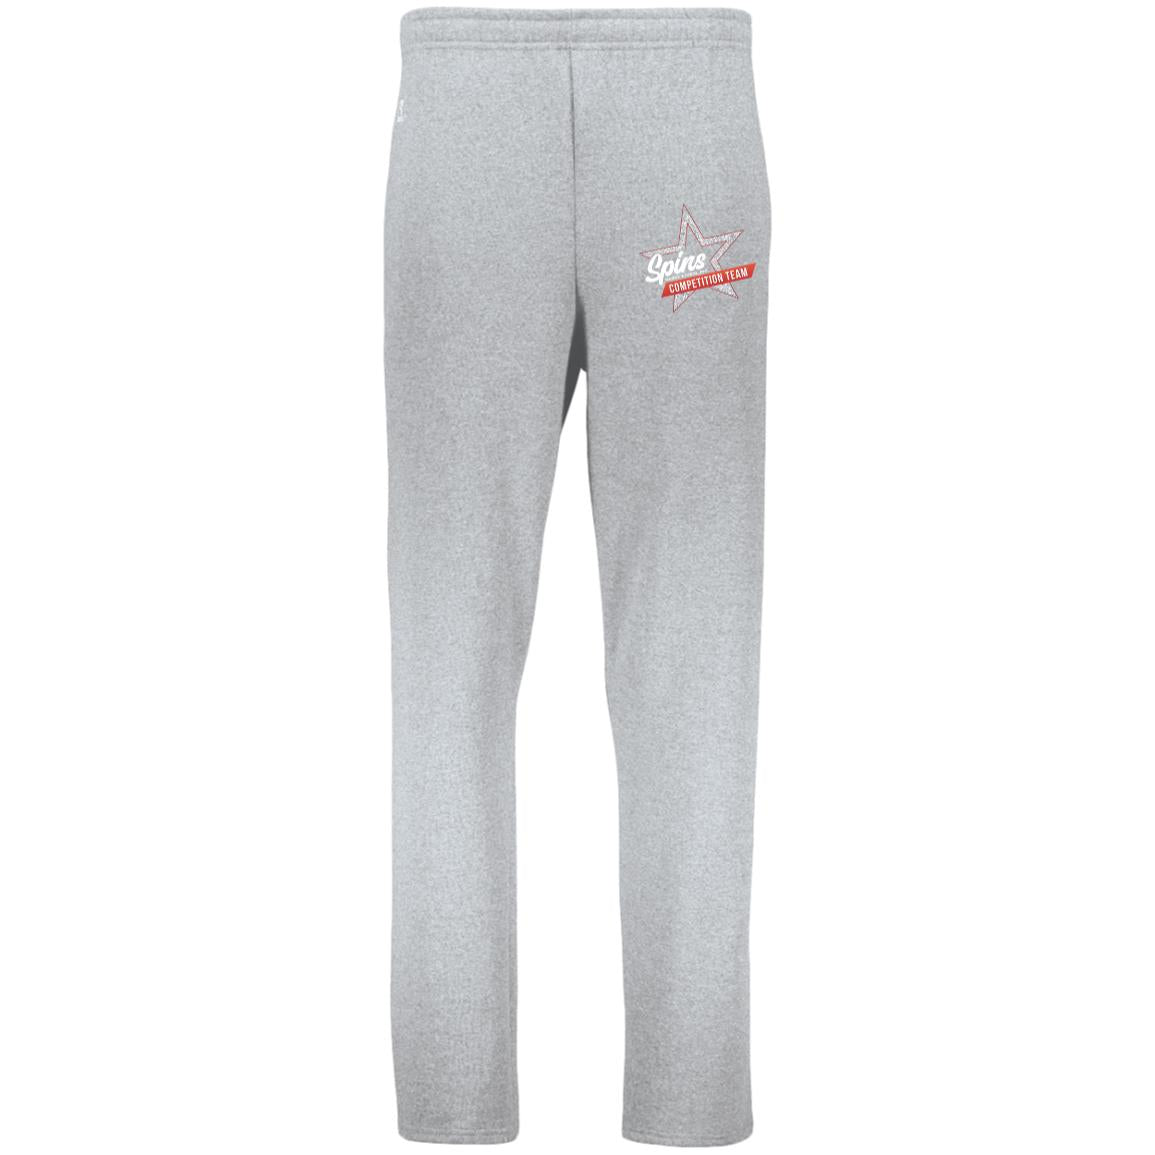 Youth Premium Open Bottom Sweatpants with Pockets